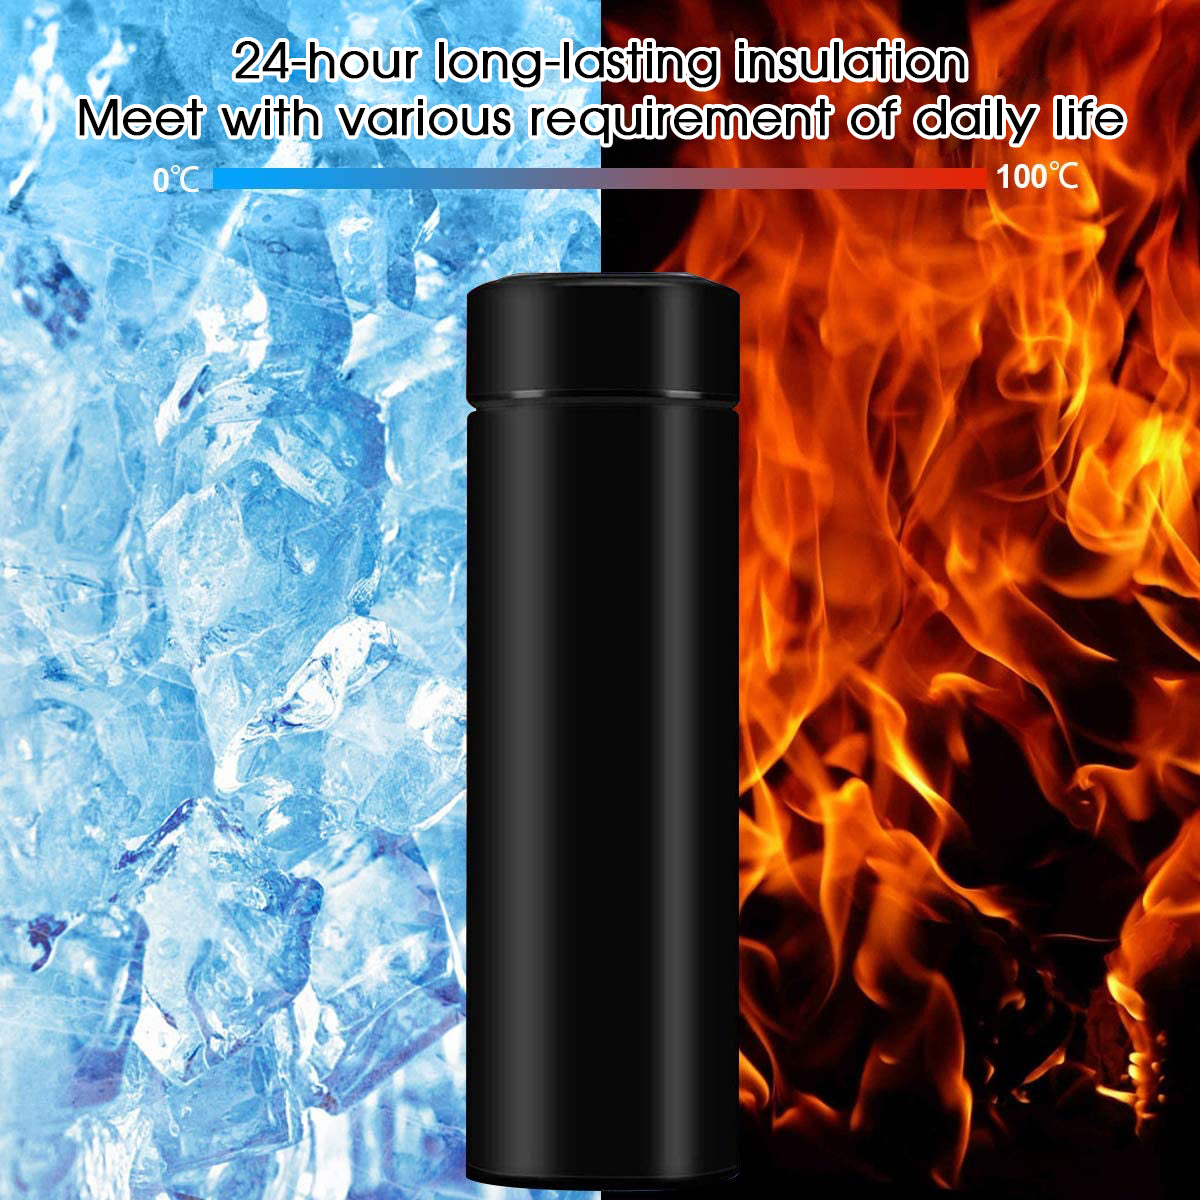 17oz Insulated Water Bottle with LED Temperature Display, Custom fit for cars, Coffee Tea Infuser Bottle Double Wall Vacuum Insulated Water Bottle for Hot or Cold Drink